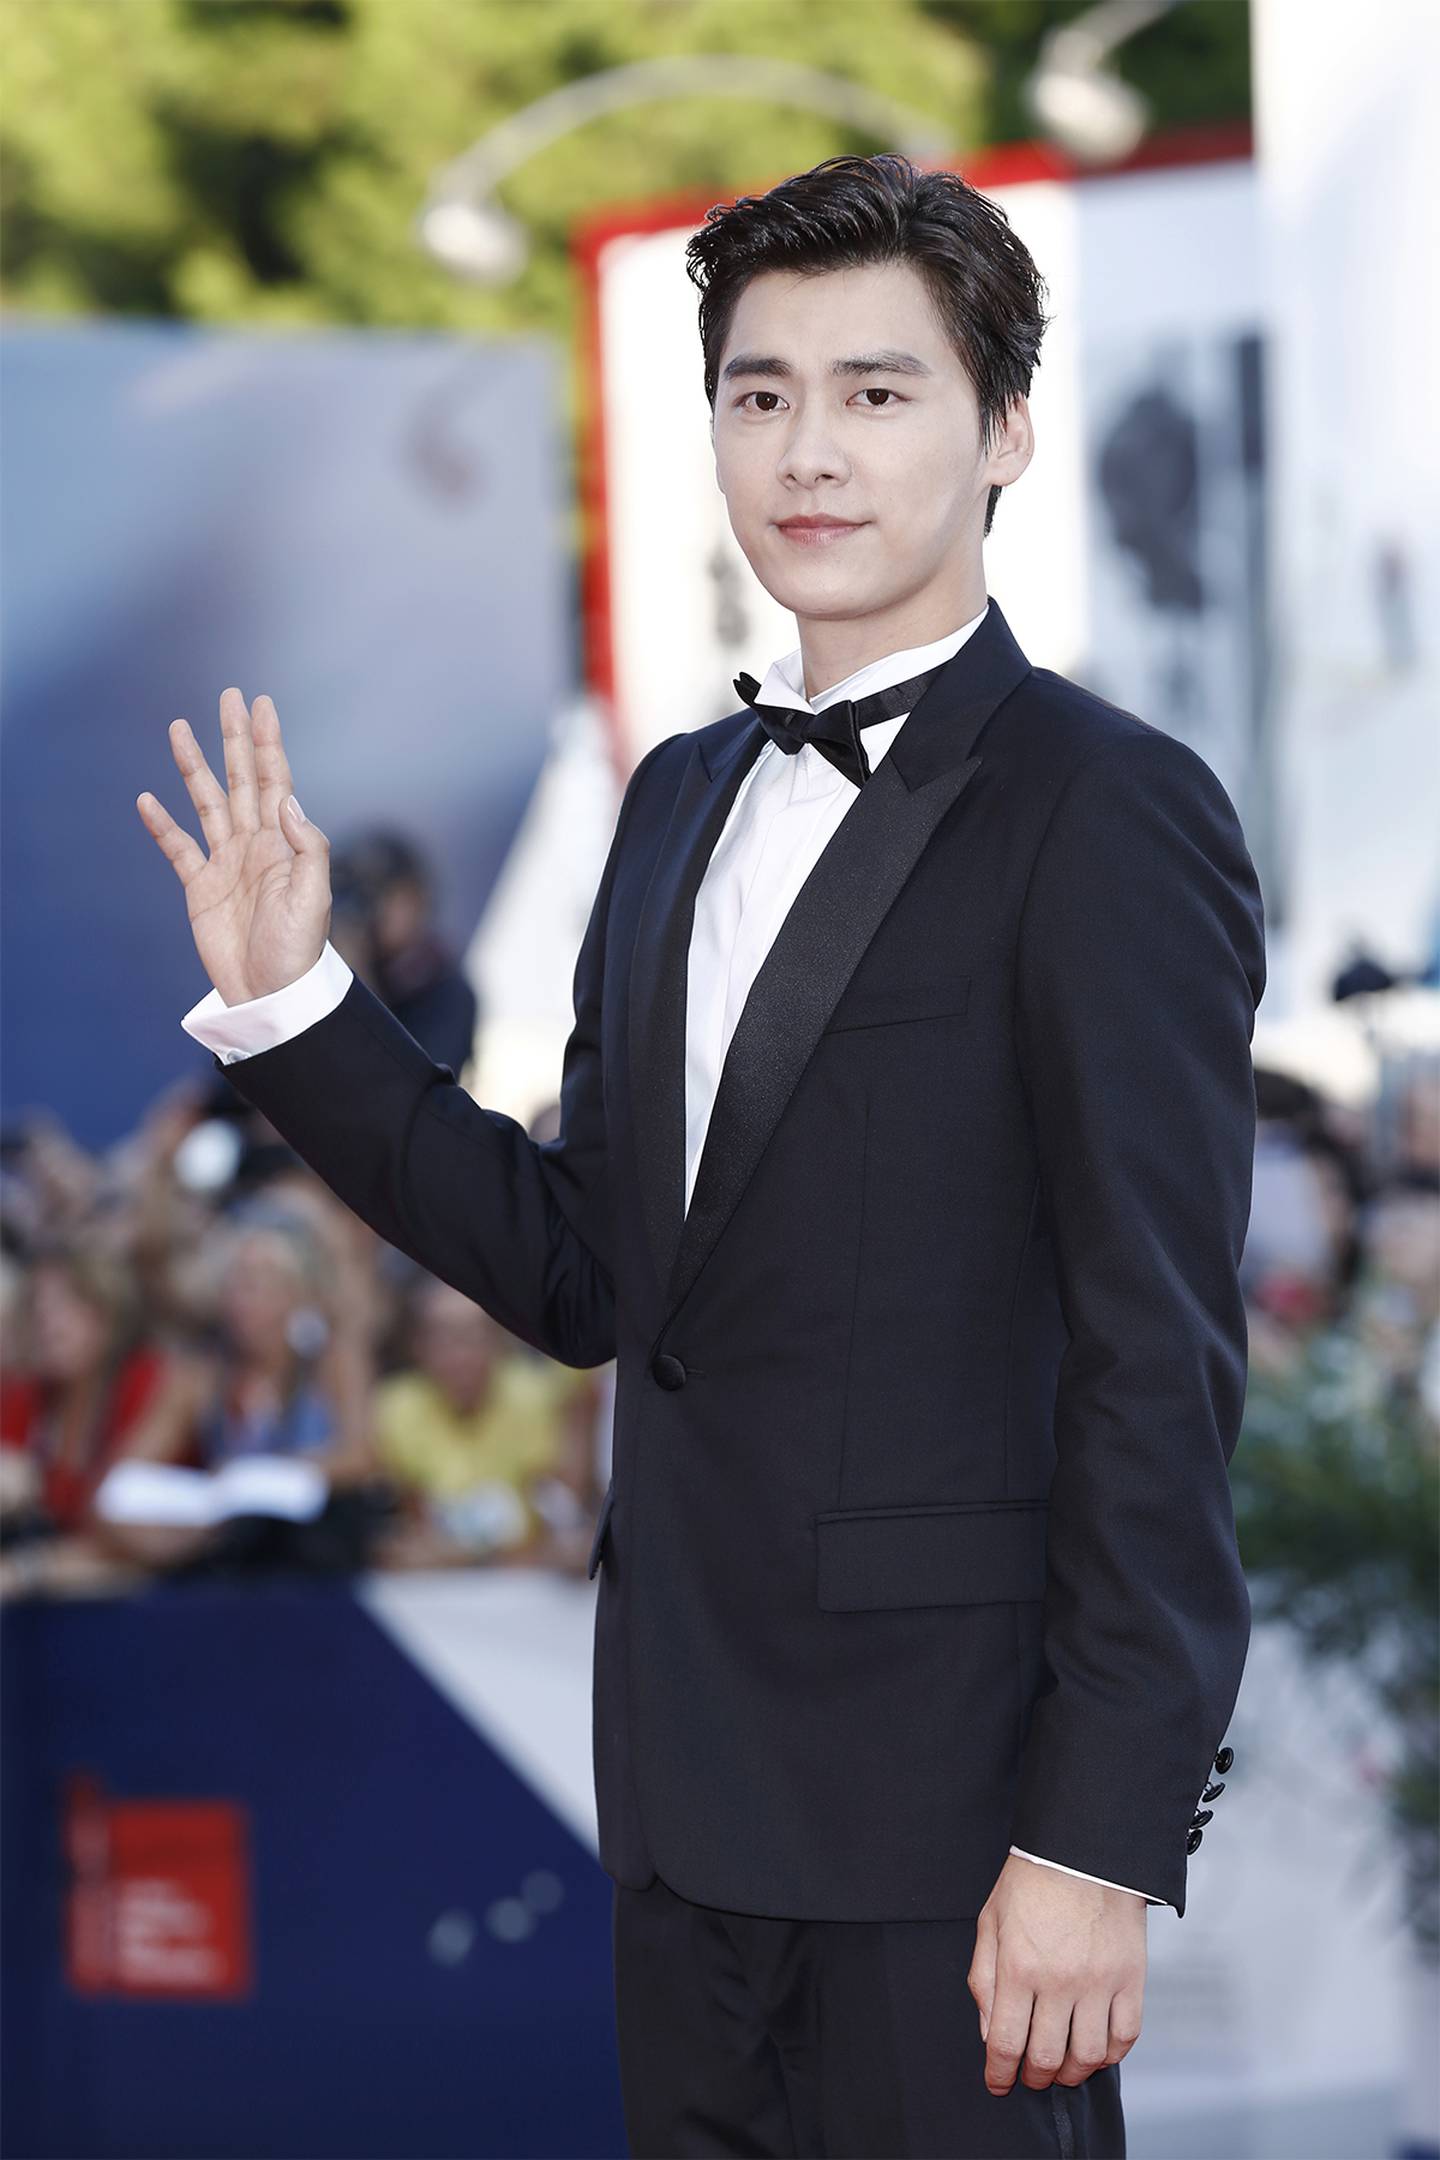 Actor Li Yifeng wearing a black tuxedo at a premiere red carpet event.